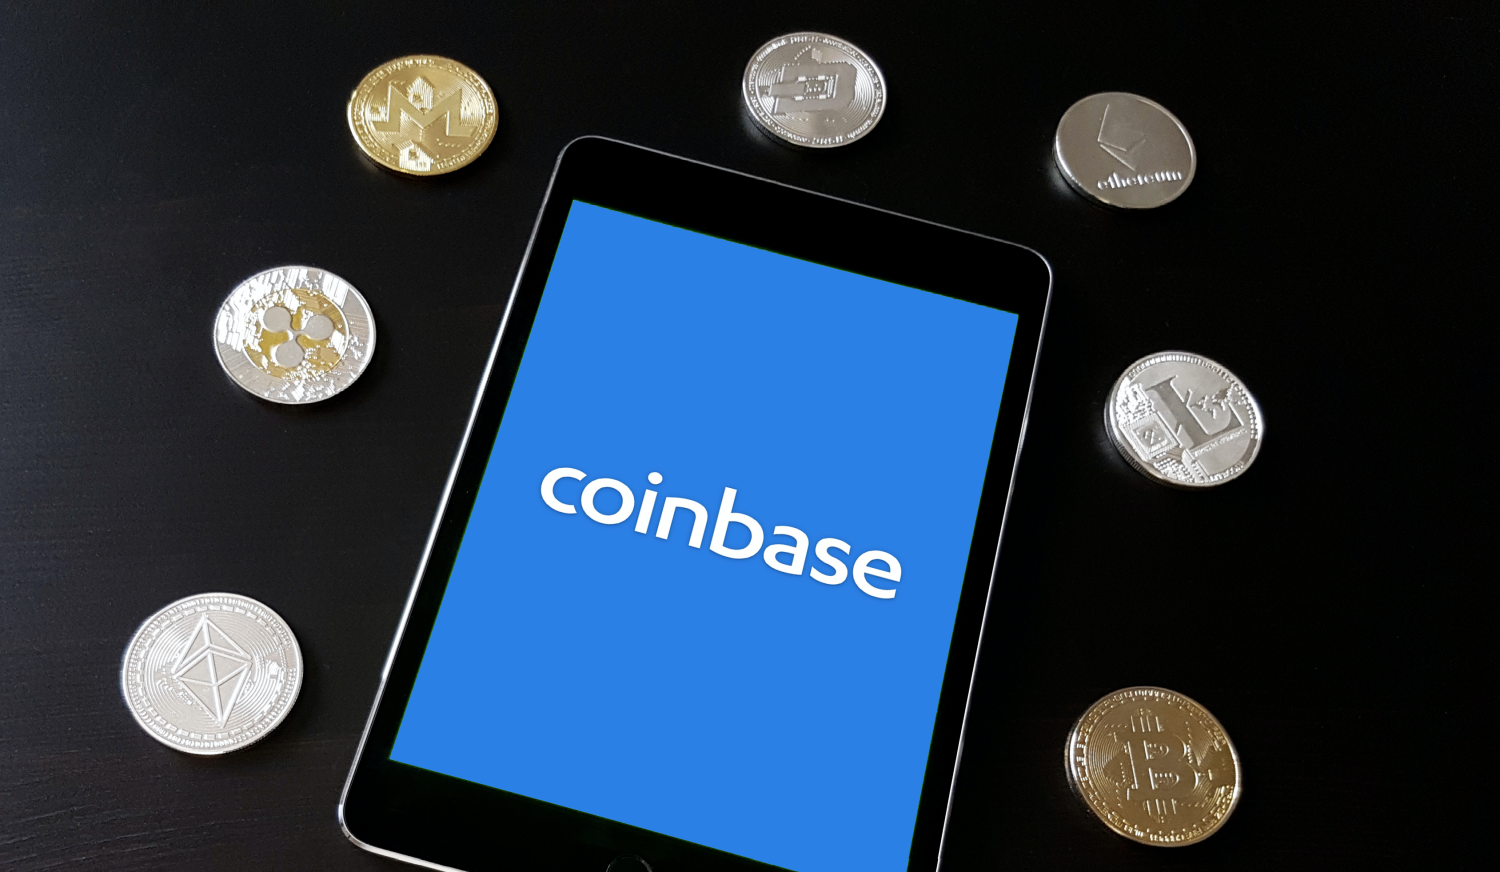 Coinbase Completes First OTC Crypto Trade Directly From ‘Cold’ Storage